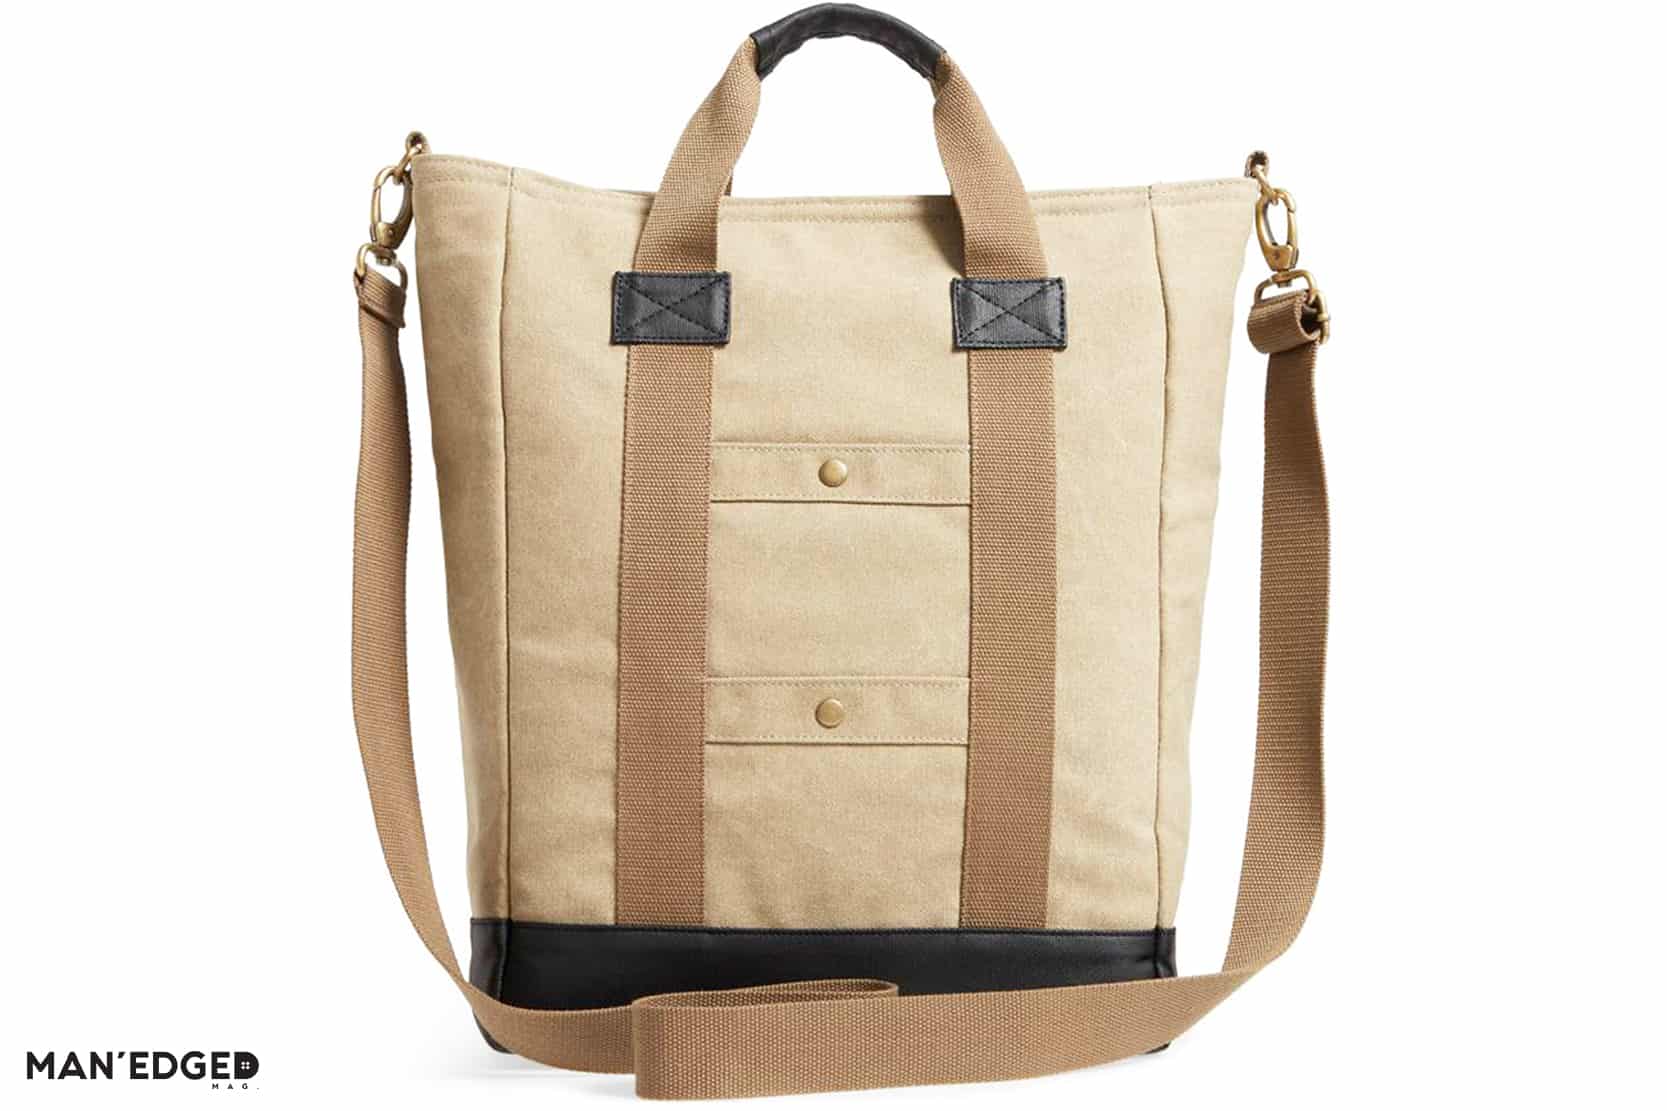 The Outdoorsman Gift Guide featuring Men's HEX tote bag from Nordstrom